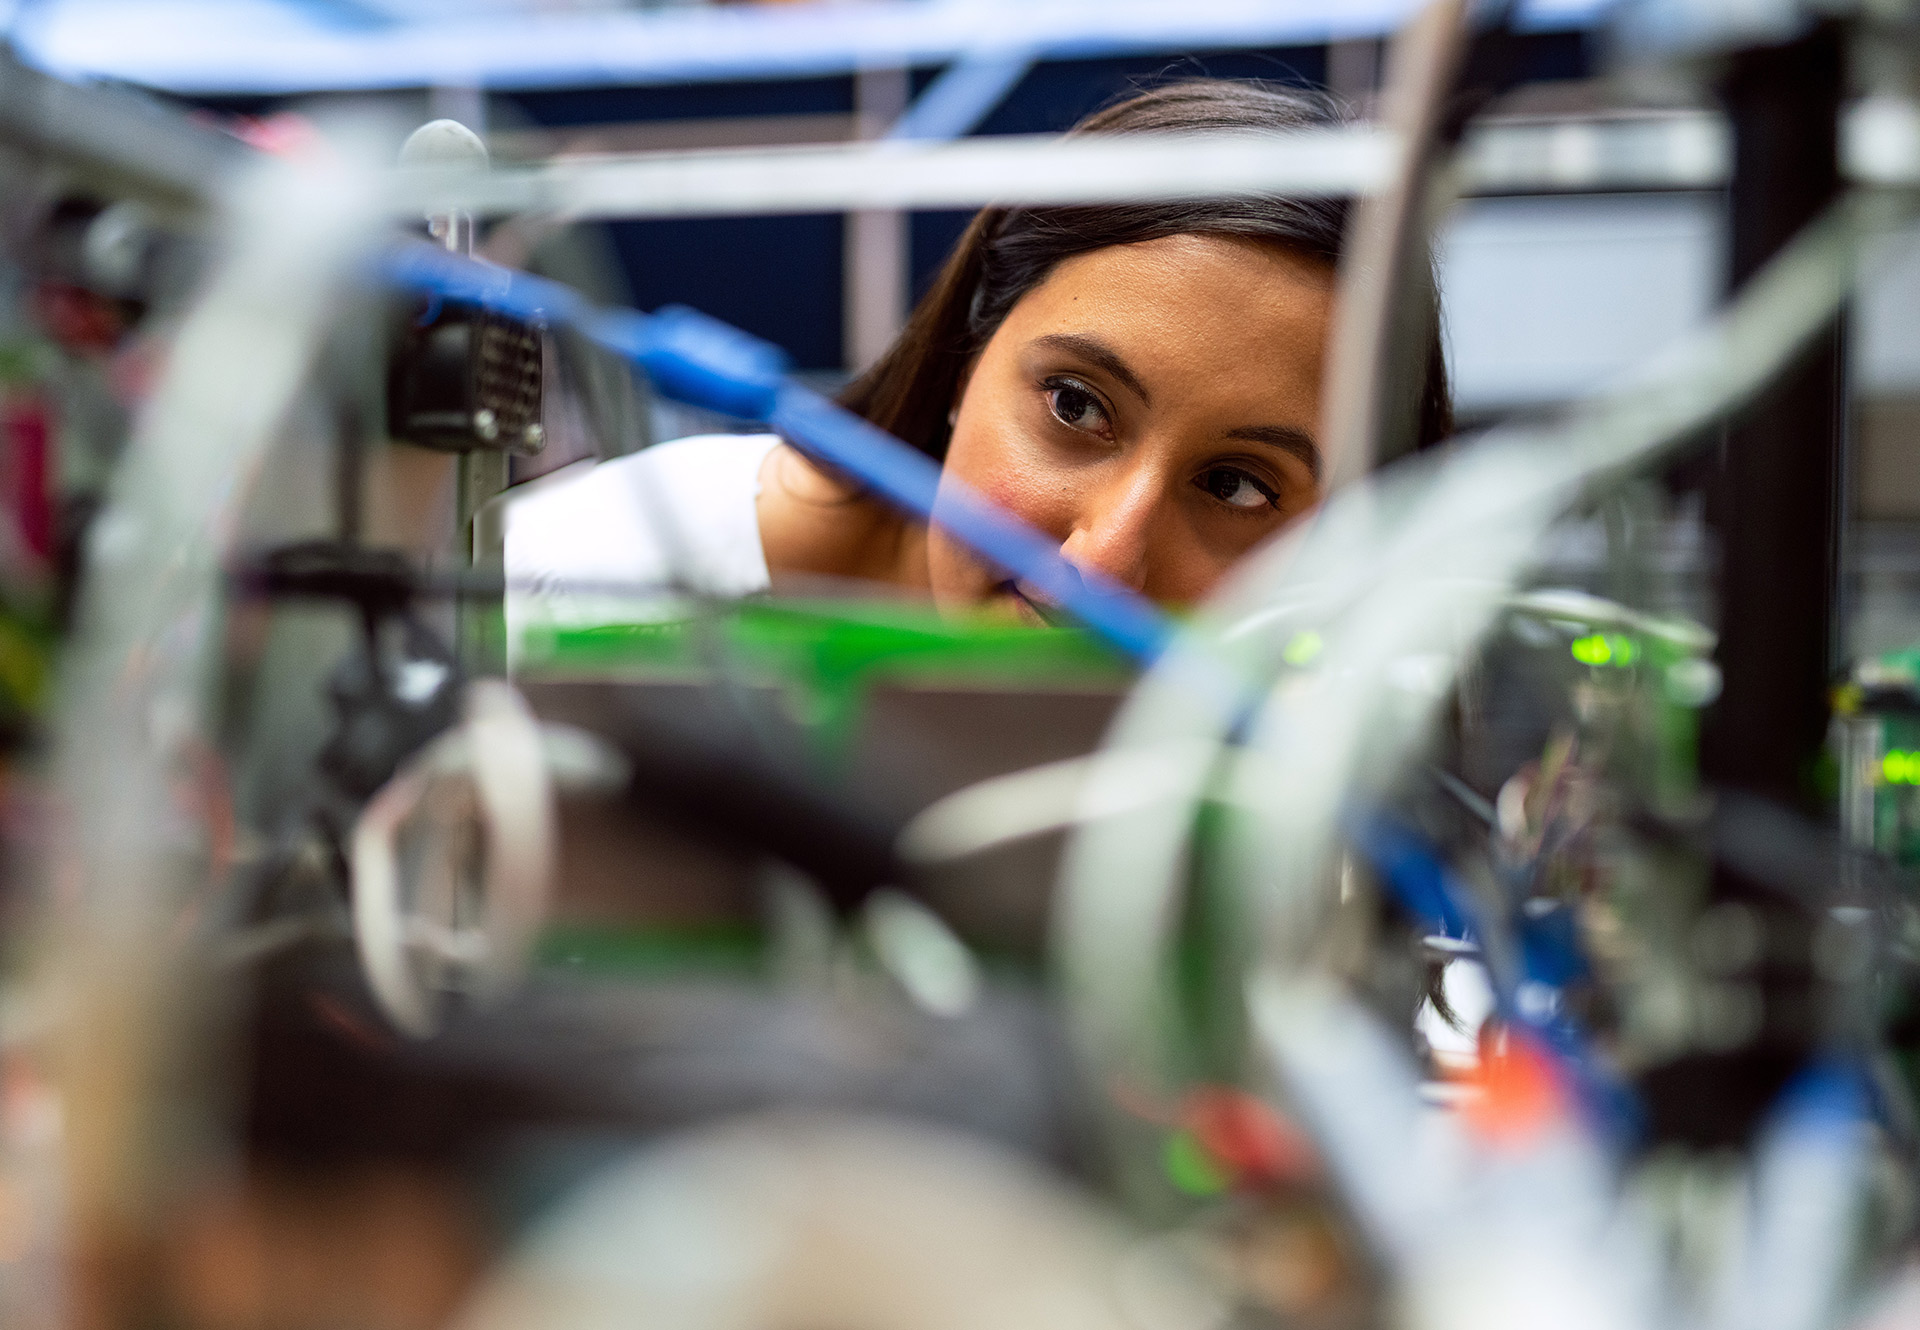 A female engineer looks at her work, which is blurred in the foreground and consists of many cables plugged into various connectors.